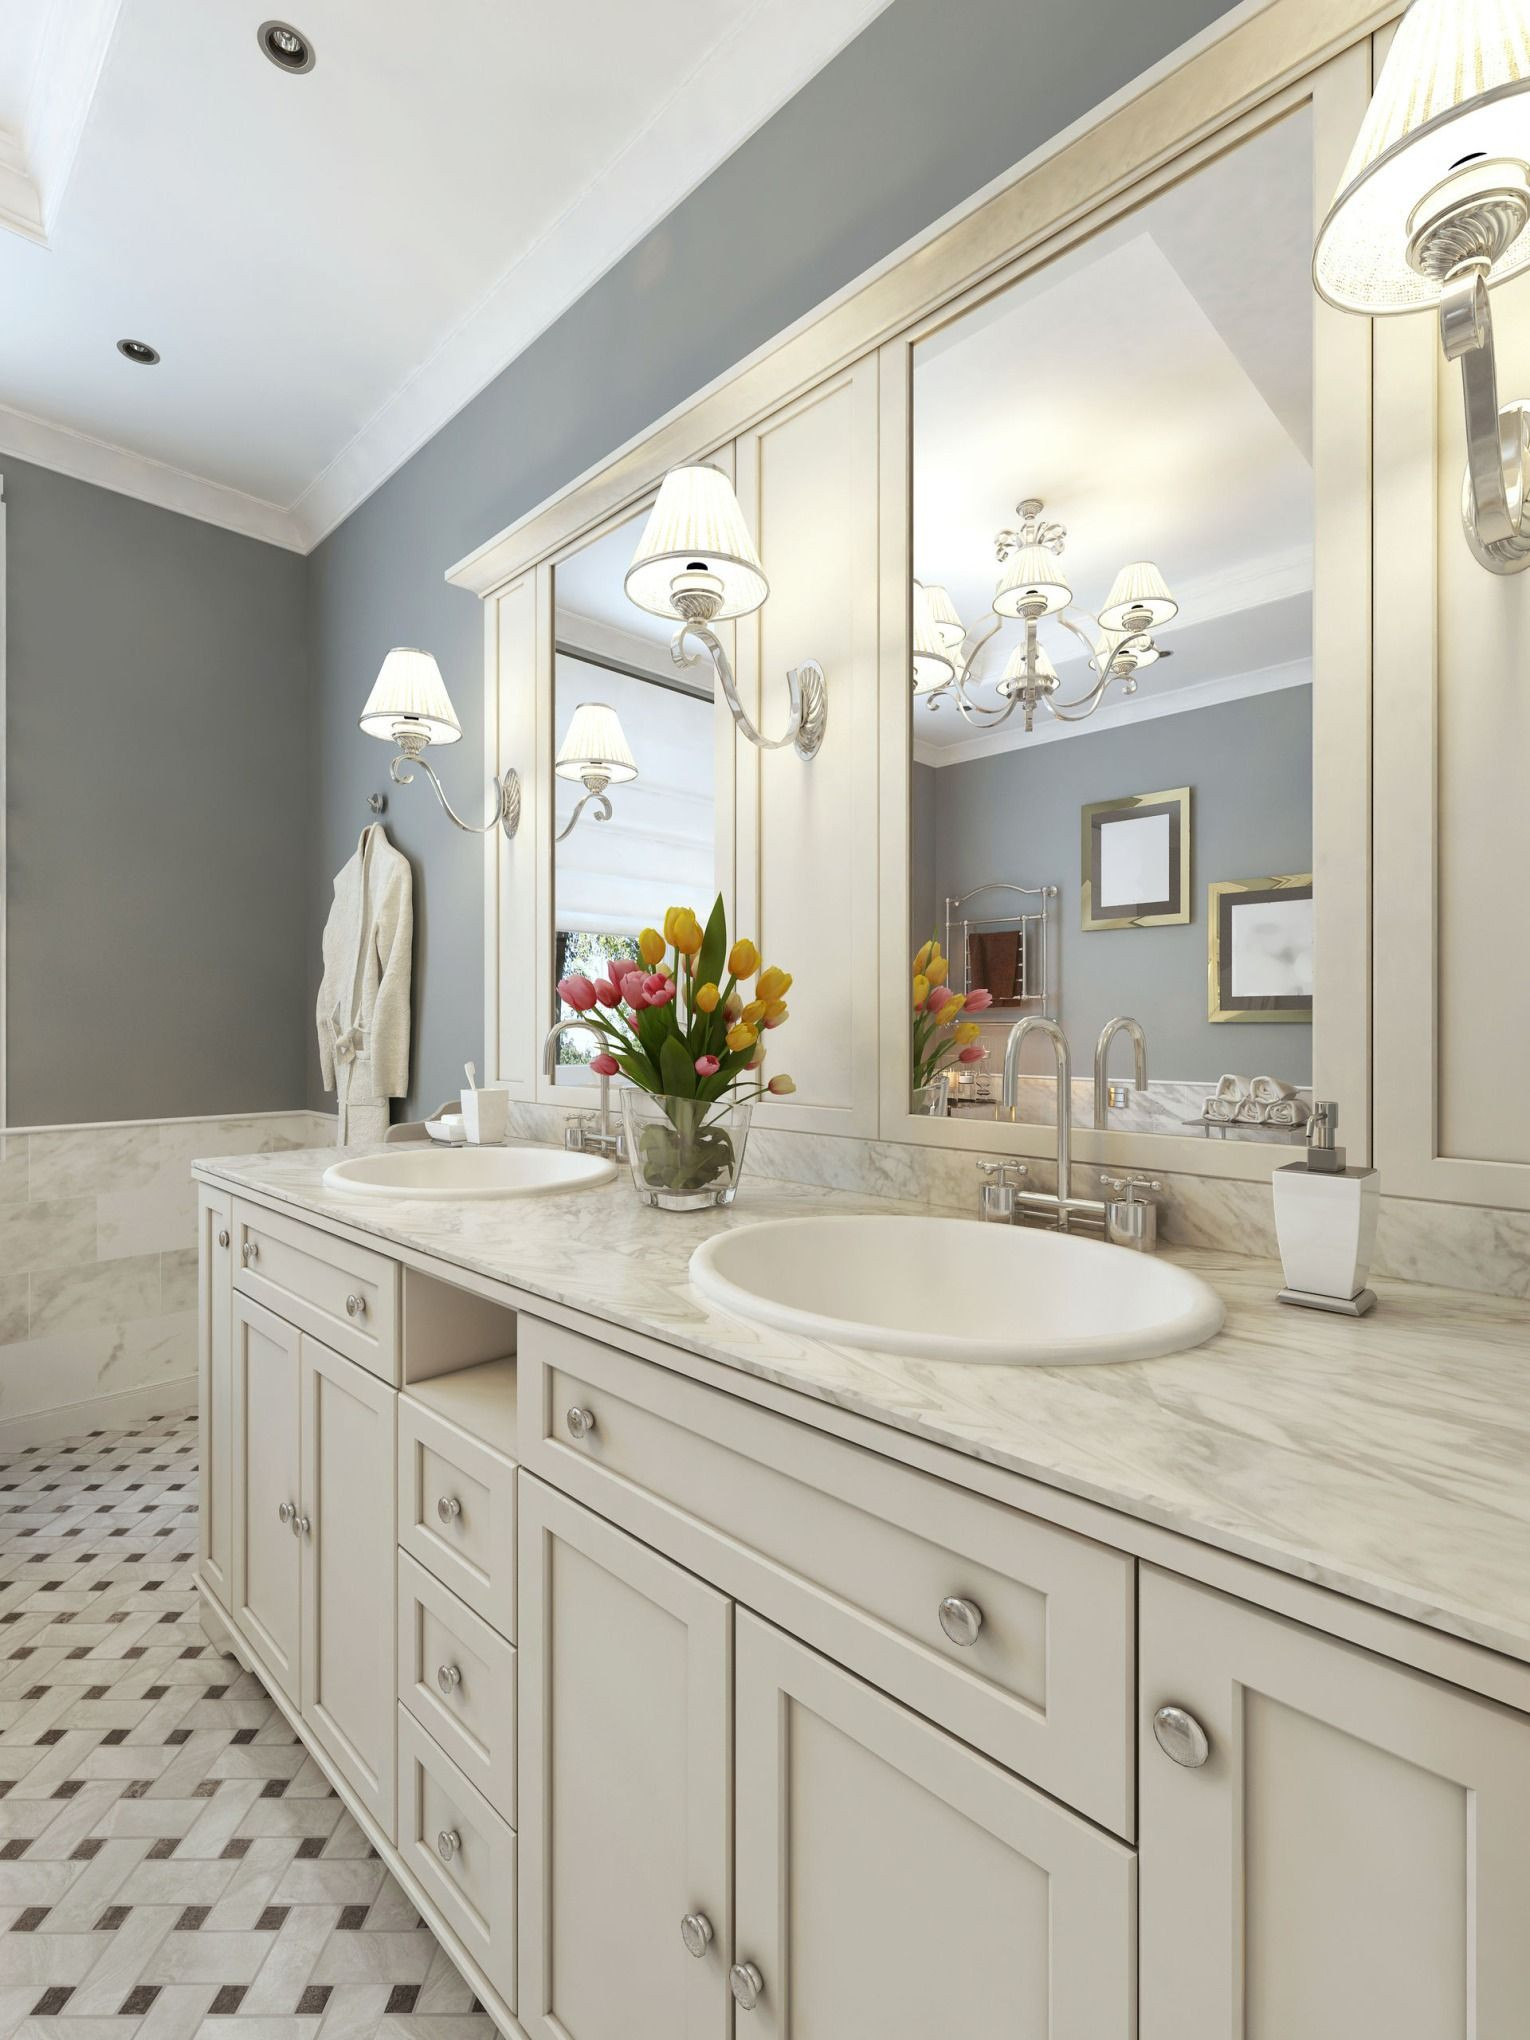 25 Insanely Gorgeous Recessed Lighting Over Bathroom Vanity - Home